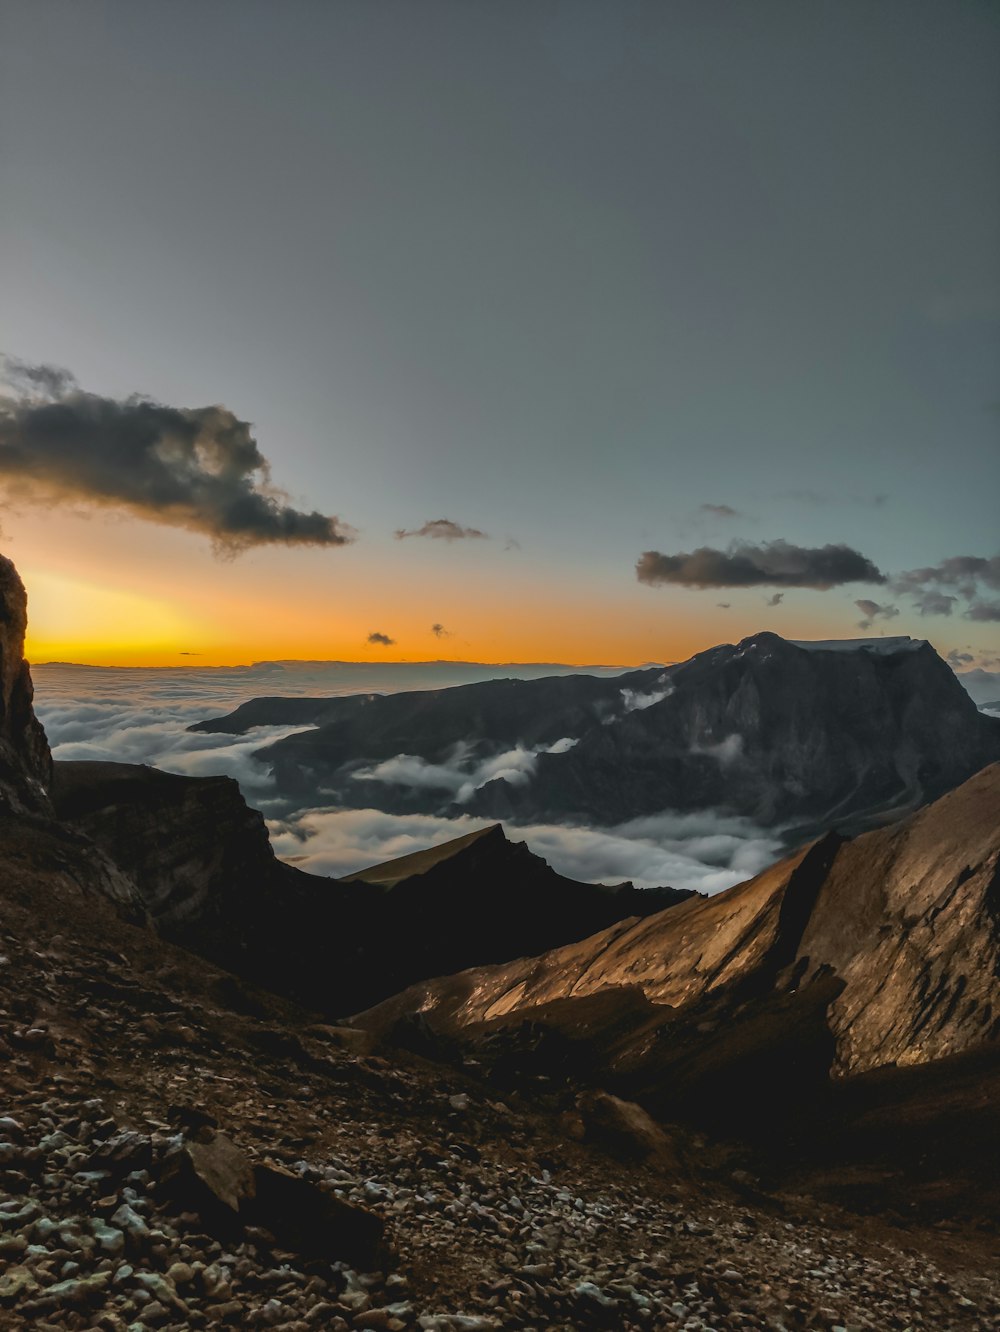 a person standing on top of a mountain at sunset